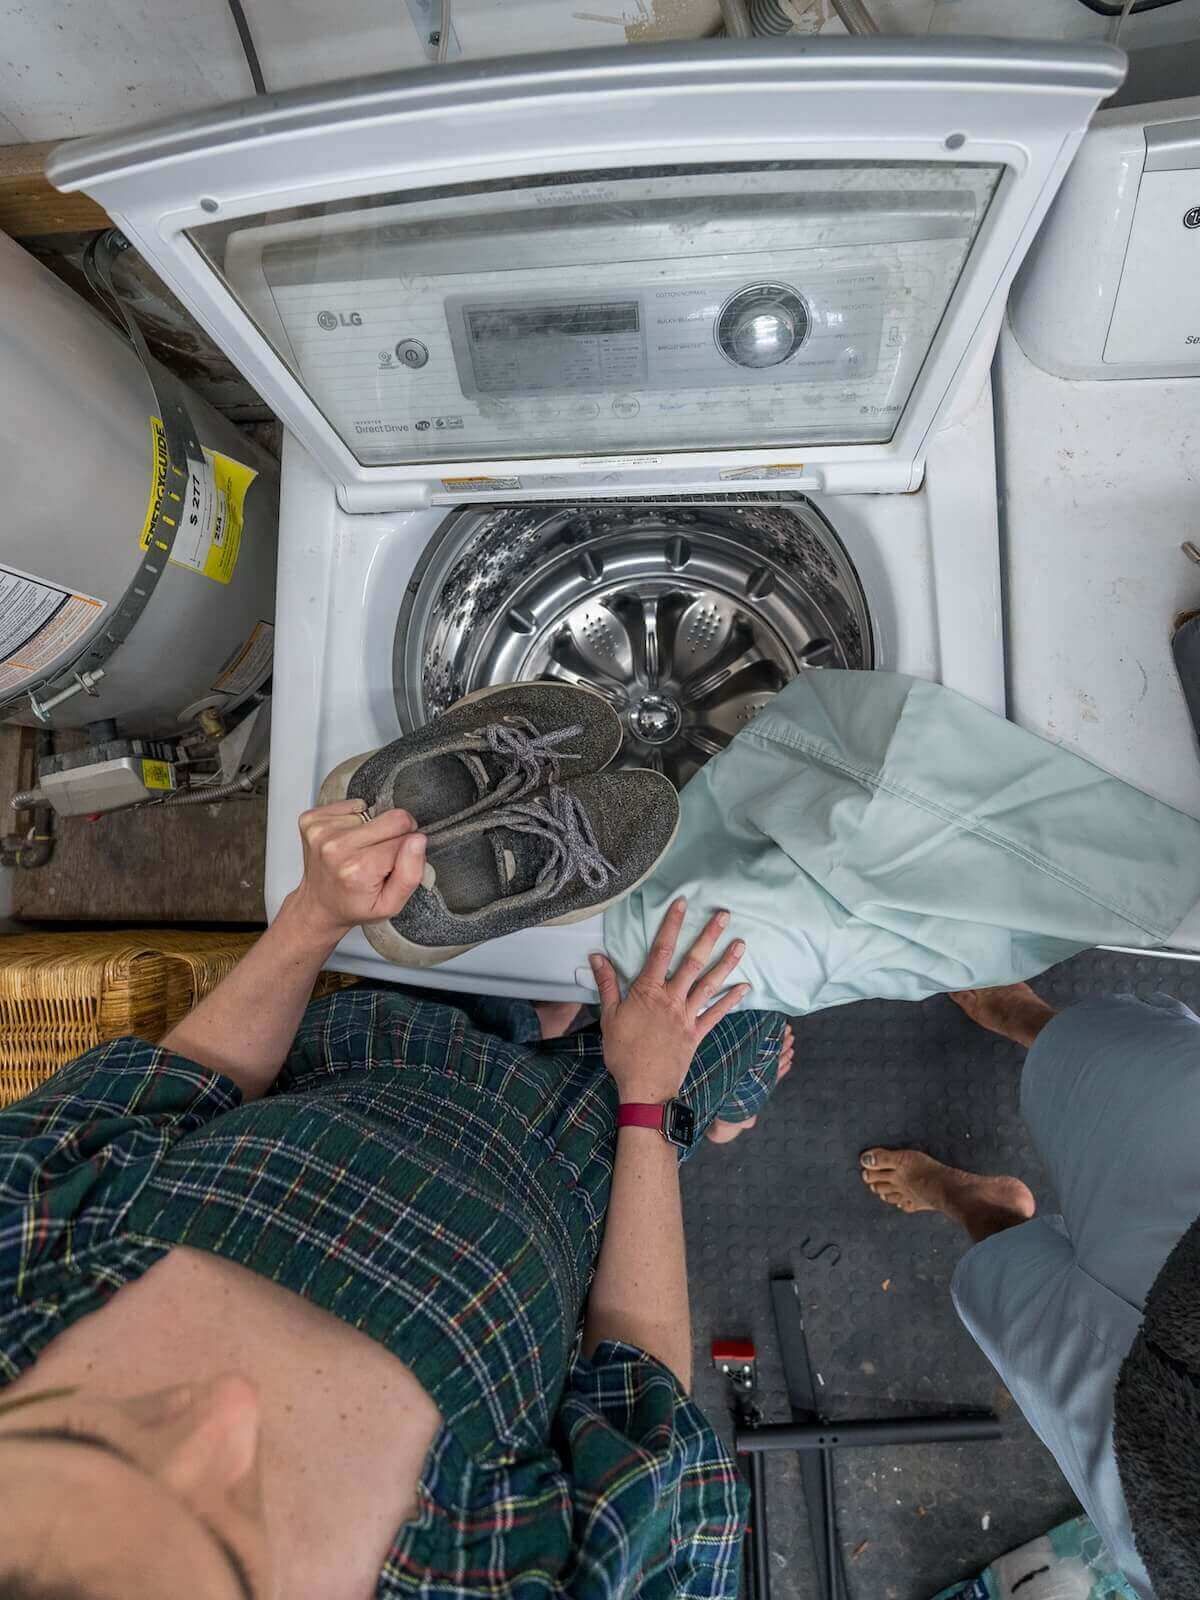 A view from above of a young woman wearing dark green plaid preparing to place a pair of grey sneakers into a washing machine.